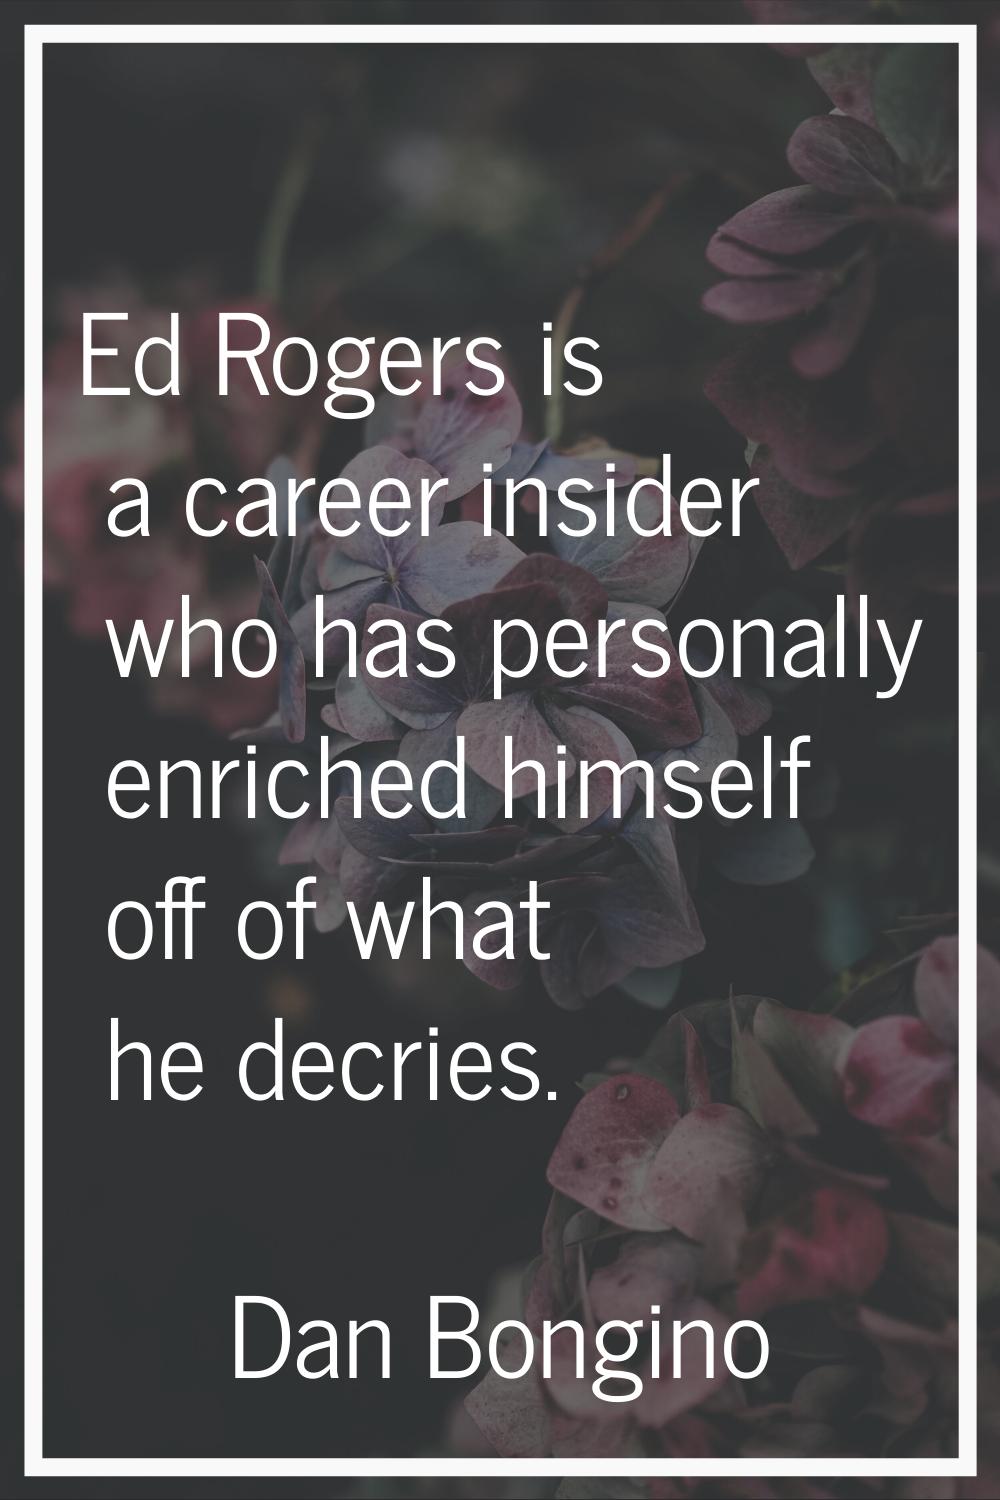 Ed Rogers is a career insider who has personally enriched himself off of what he decries.